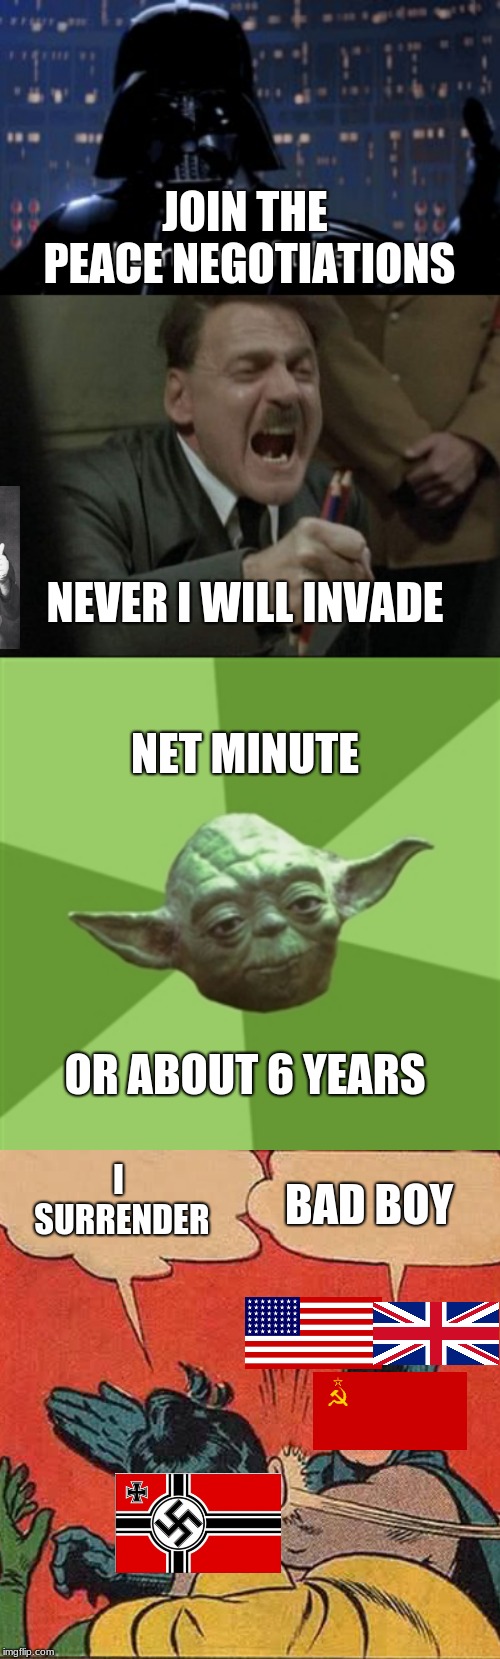 JOIN THE PEACE NEGOTIATIONS; NEVER I WILL INVADE; NET MINUTE; OR ABOUT 6 YEARS; I SURRENDER; BAD BOY | image tagged in memes,advice yoda,you were the chosen one star wars,hitler downfall | made w/ Imgflip meme maker